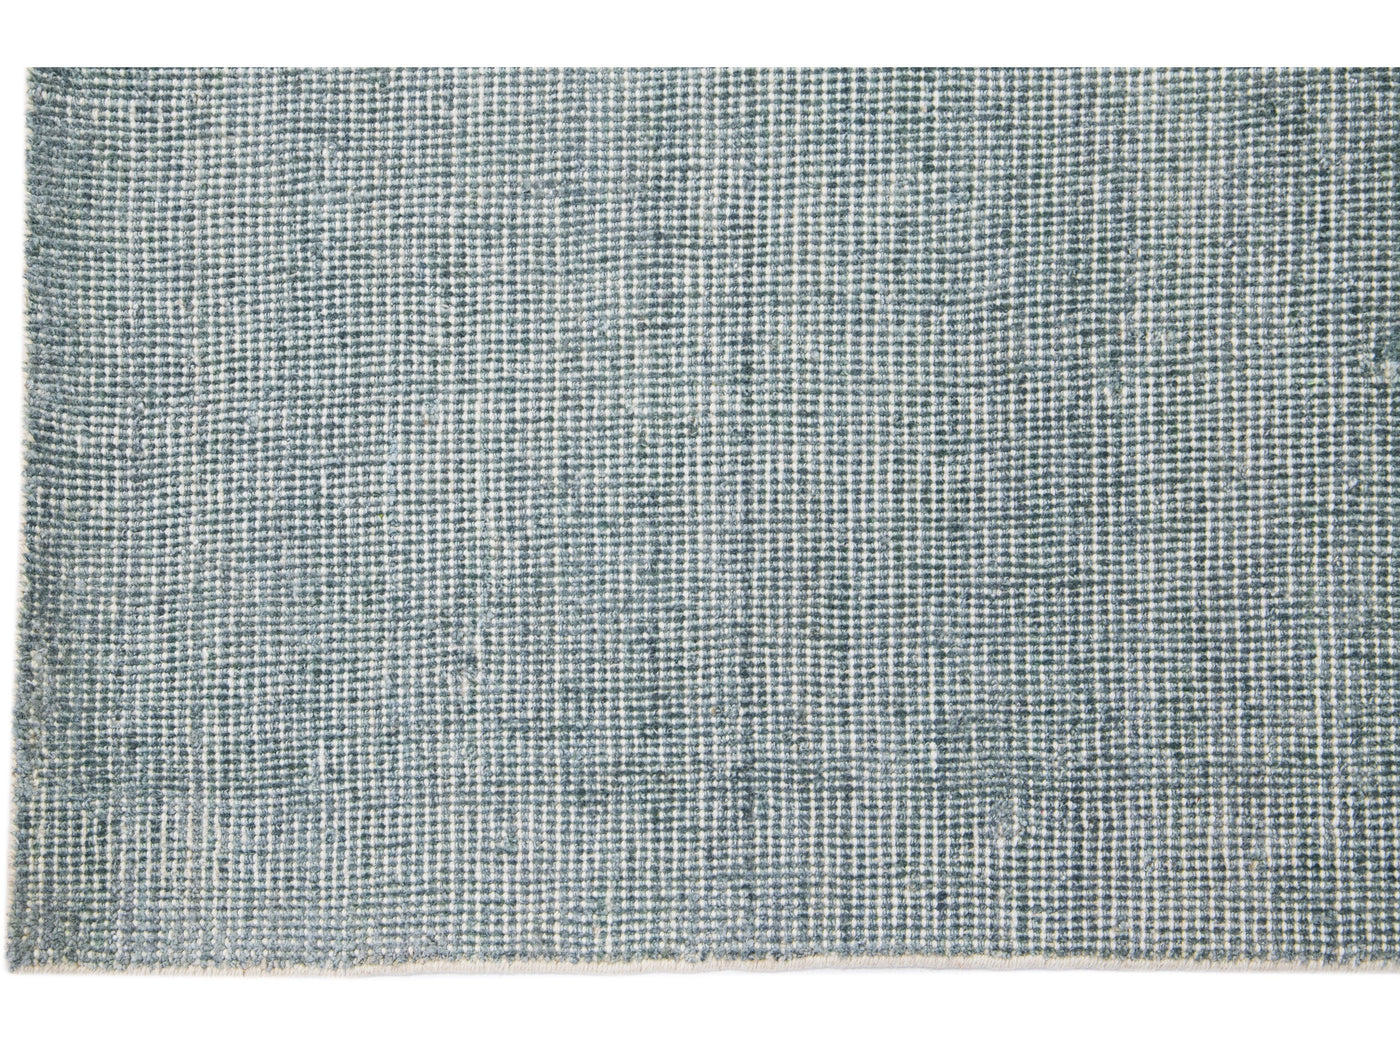 Modern Groove Collection Rug 3 x 8